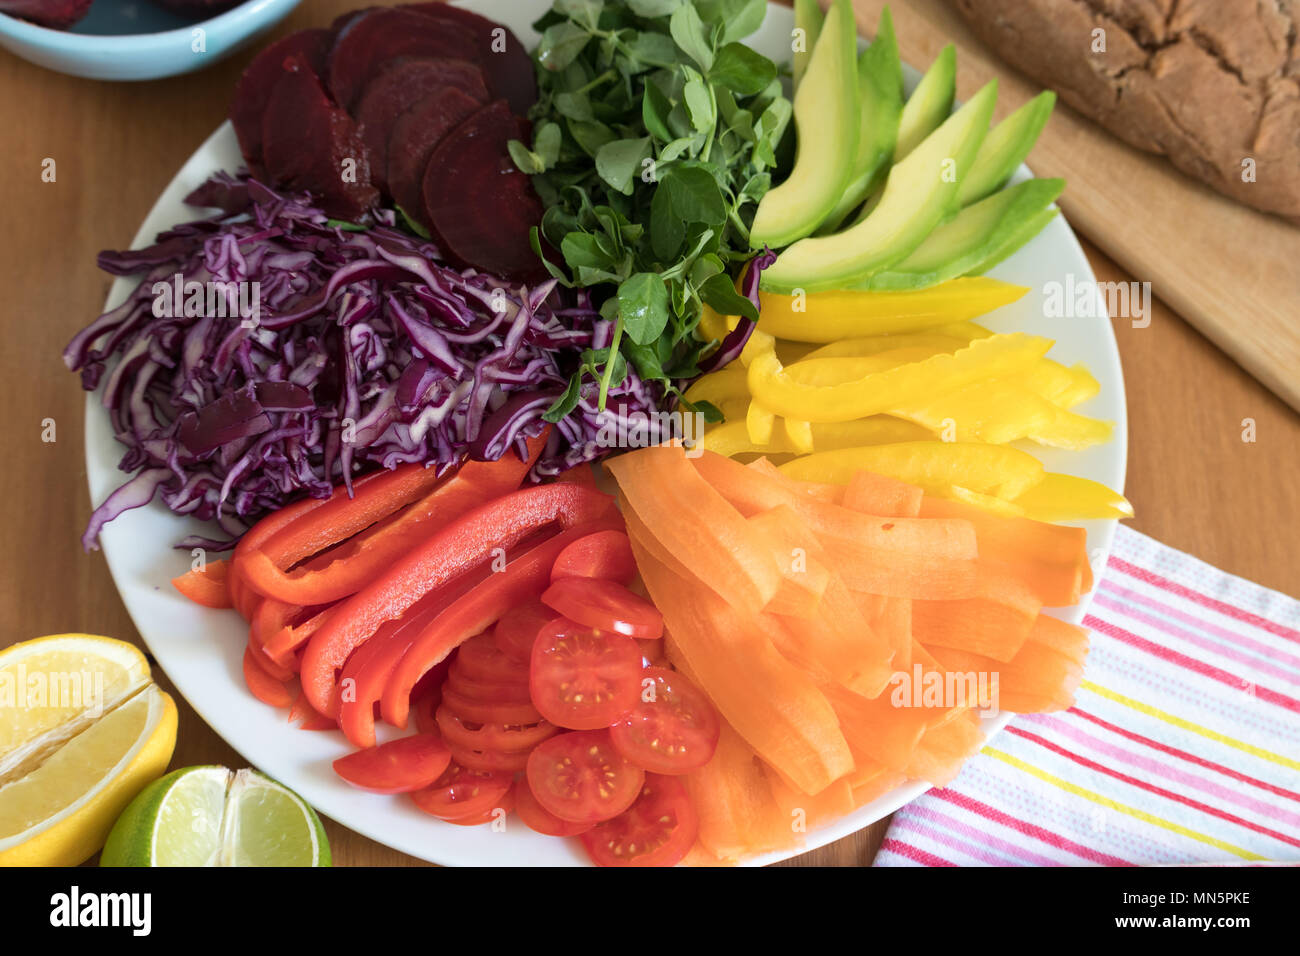 Rainbow salad with fresh baked, gluten free buckwheat bread. This healthy meal includes avocado, peppers, carrot tomato, beetroot, cabbage & peashoots. Stock Photo